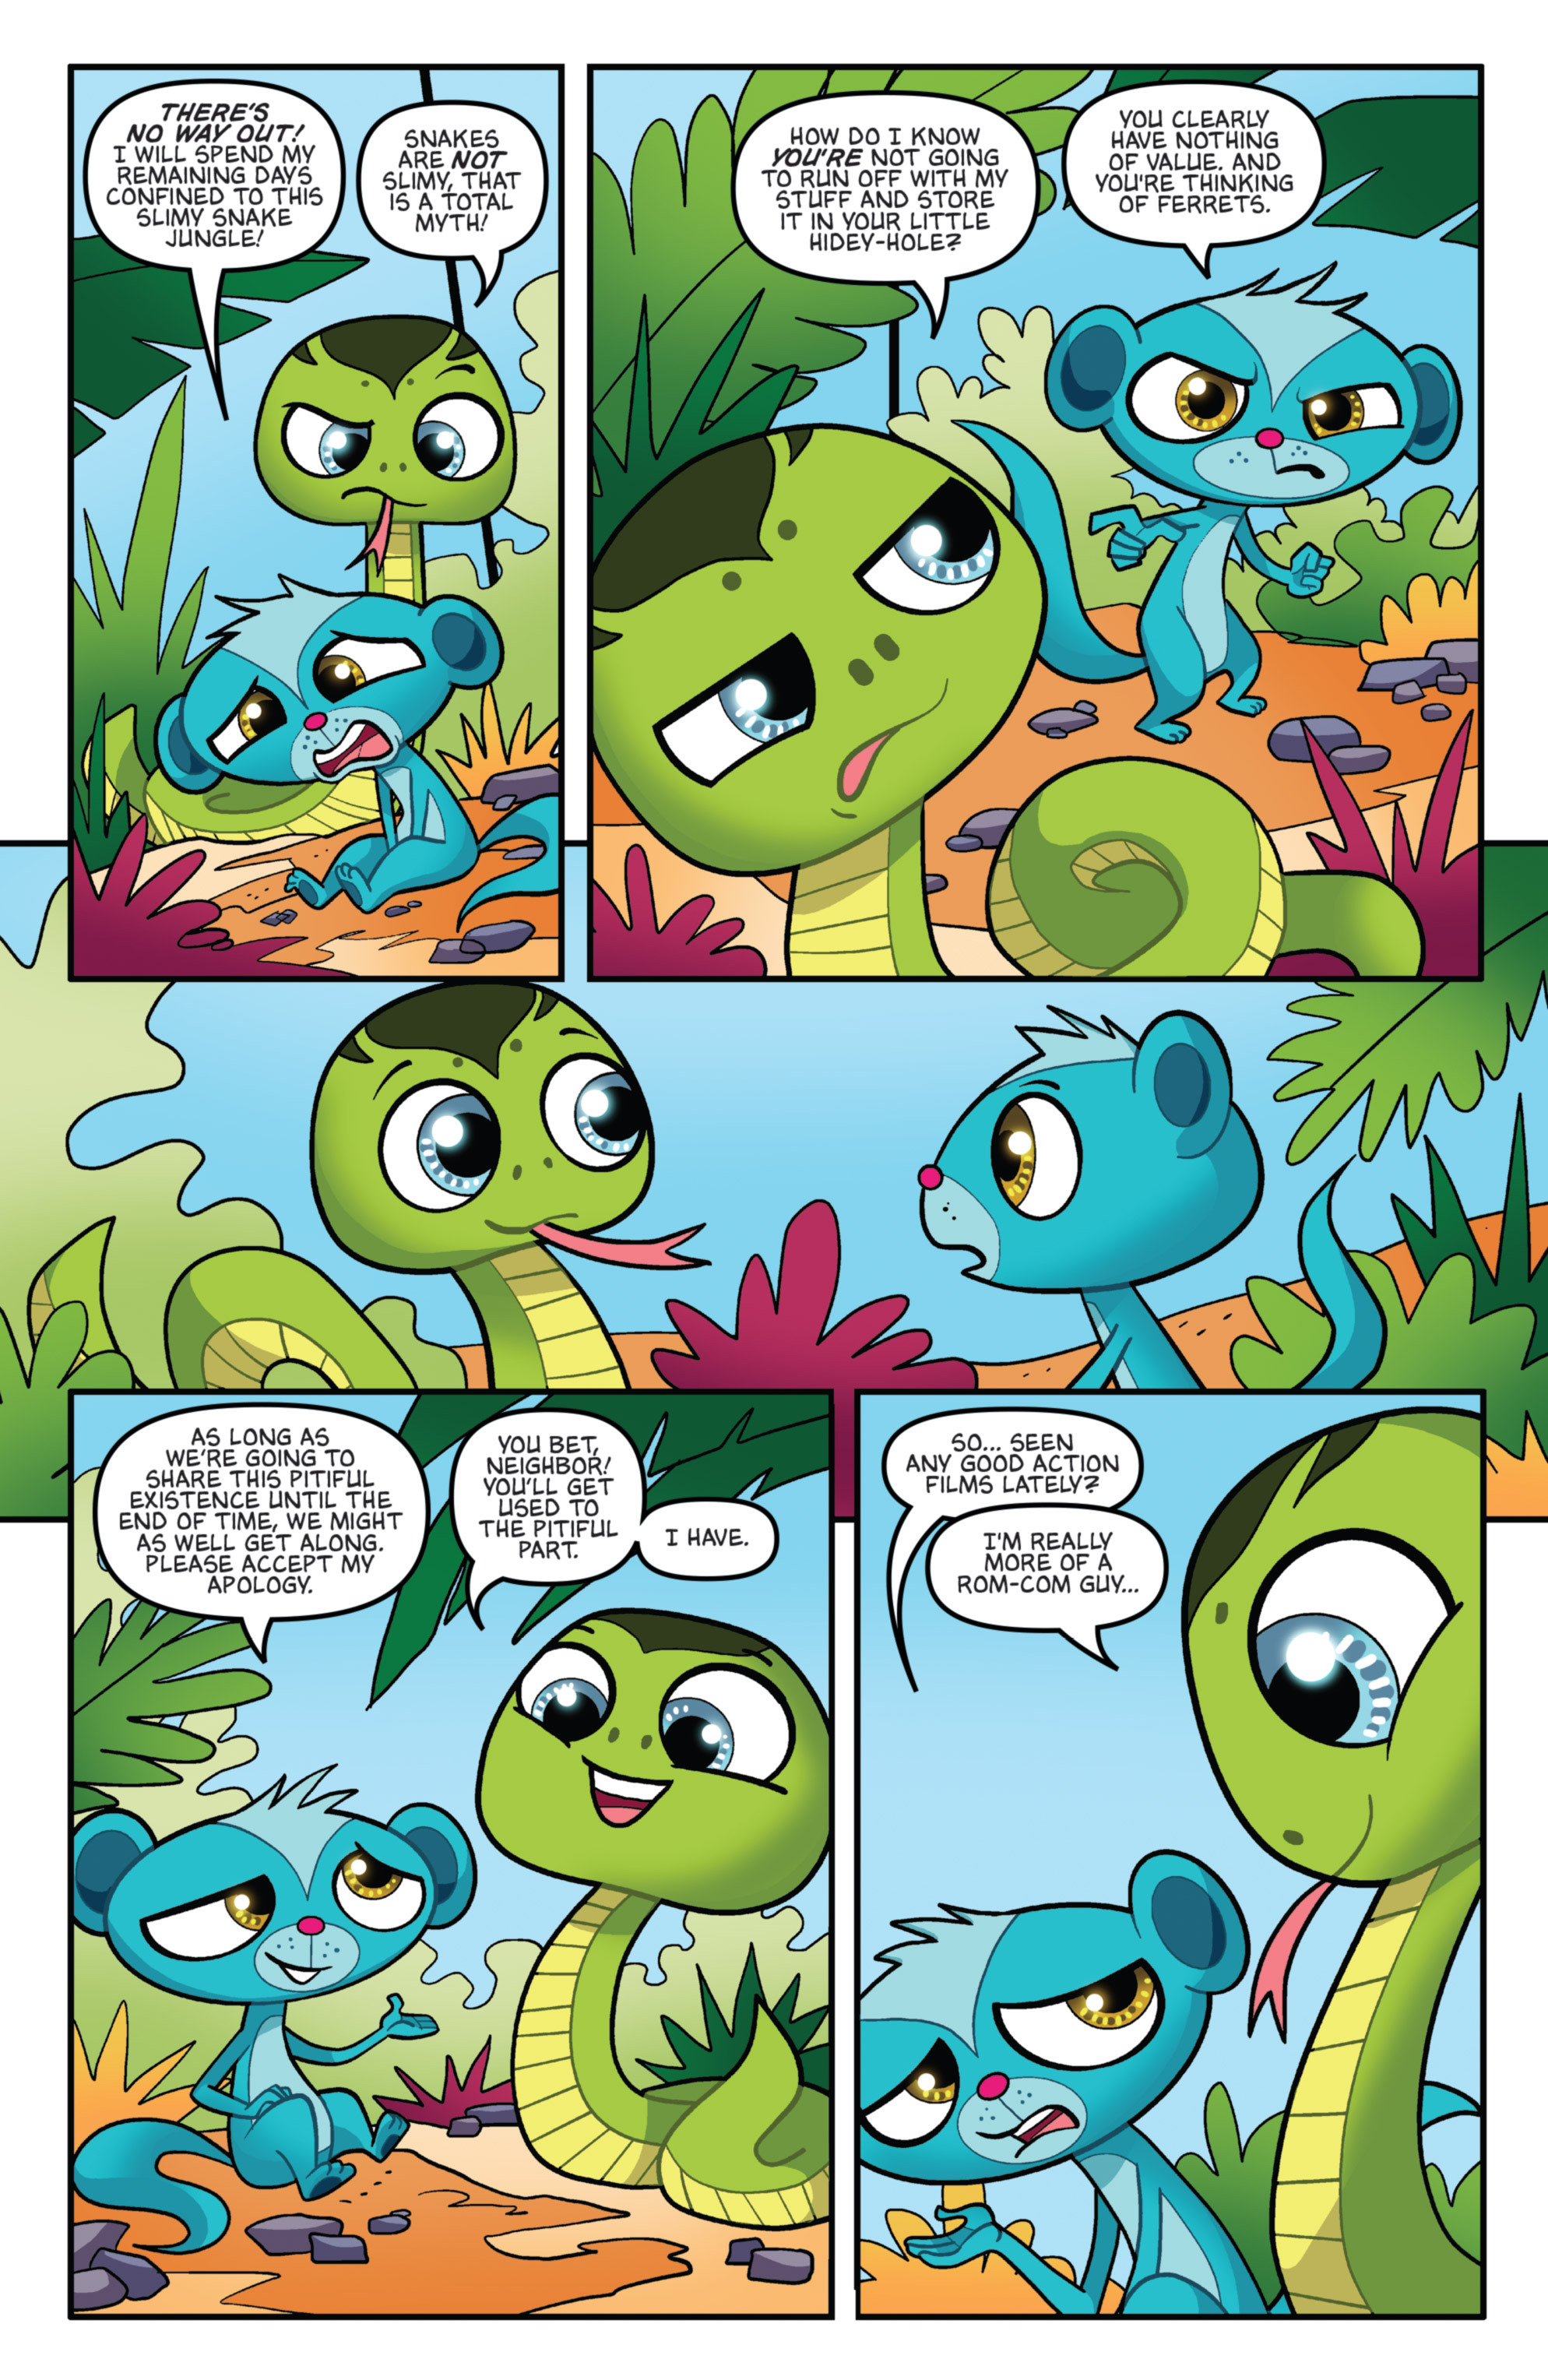 Littlest Pet Shop Issue 3 | Read Littlest Pet Shop Issue 3 comic online in  high quality. Read Full Comic online for free - Read comics online in high  quality .